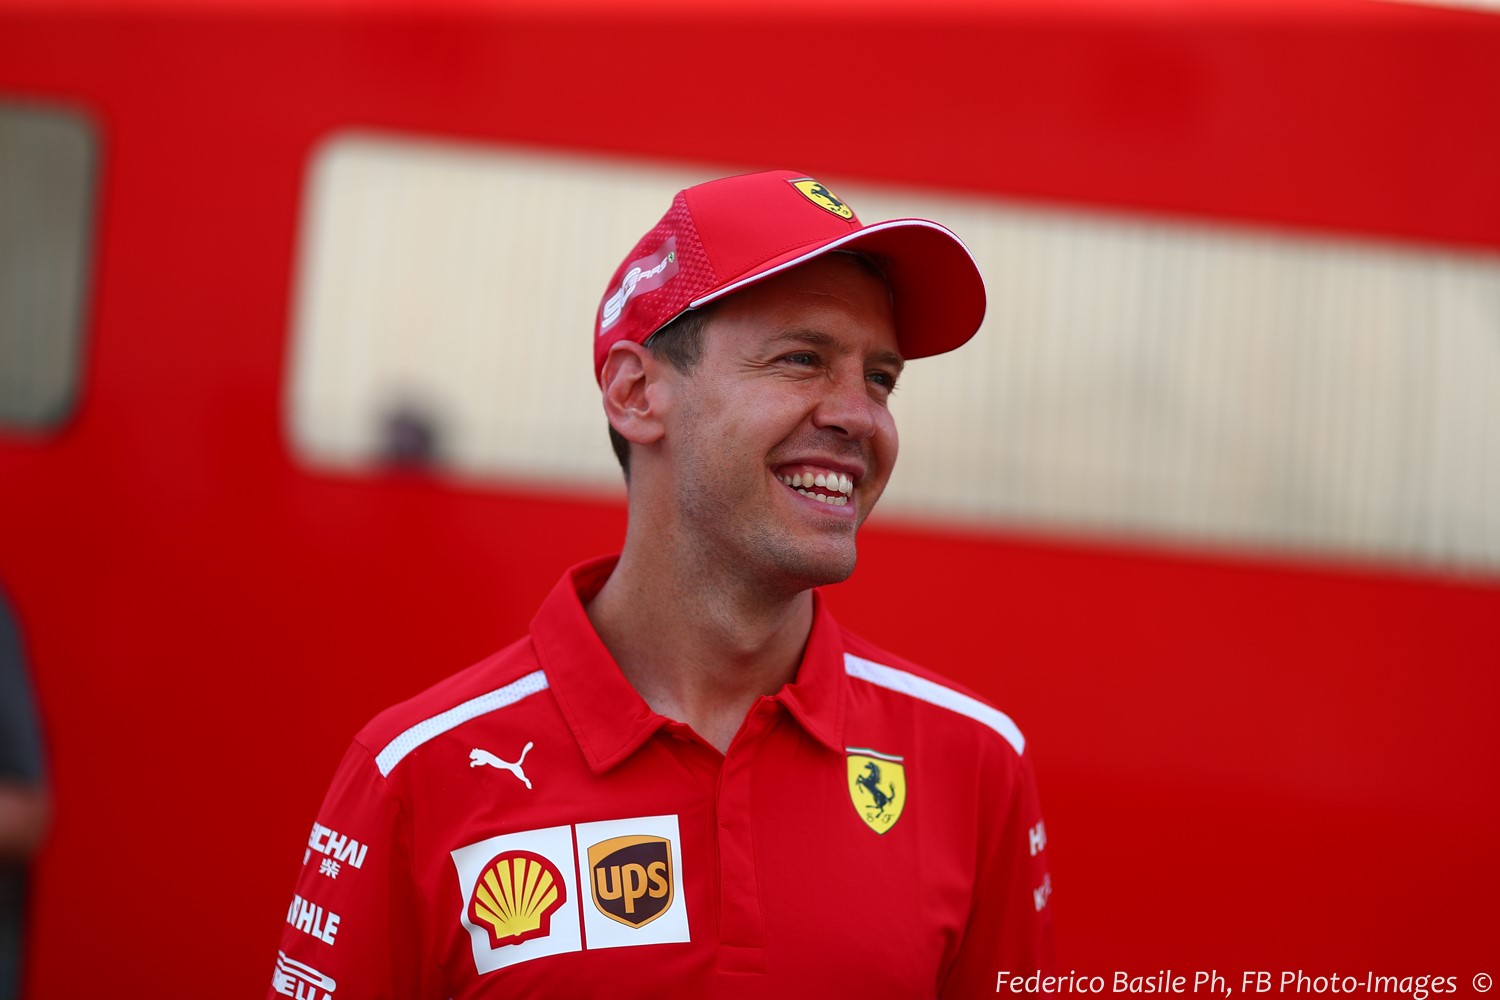 Vettel has to perform well early in 2020